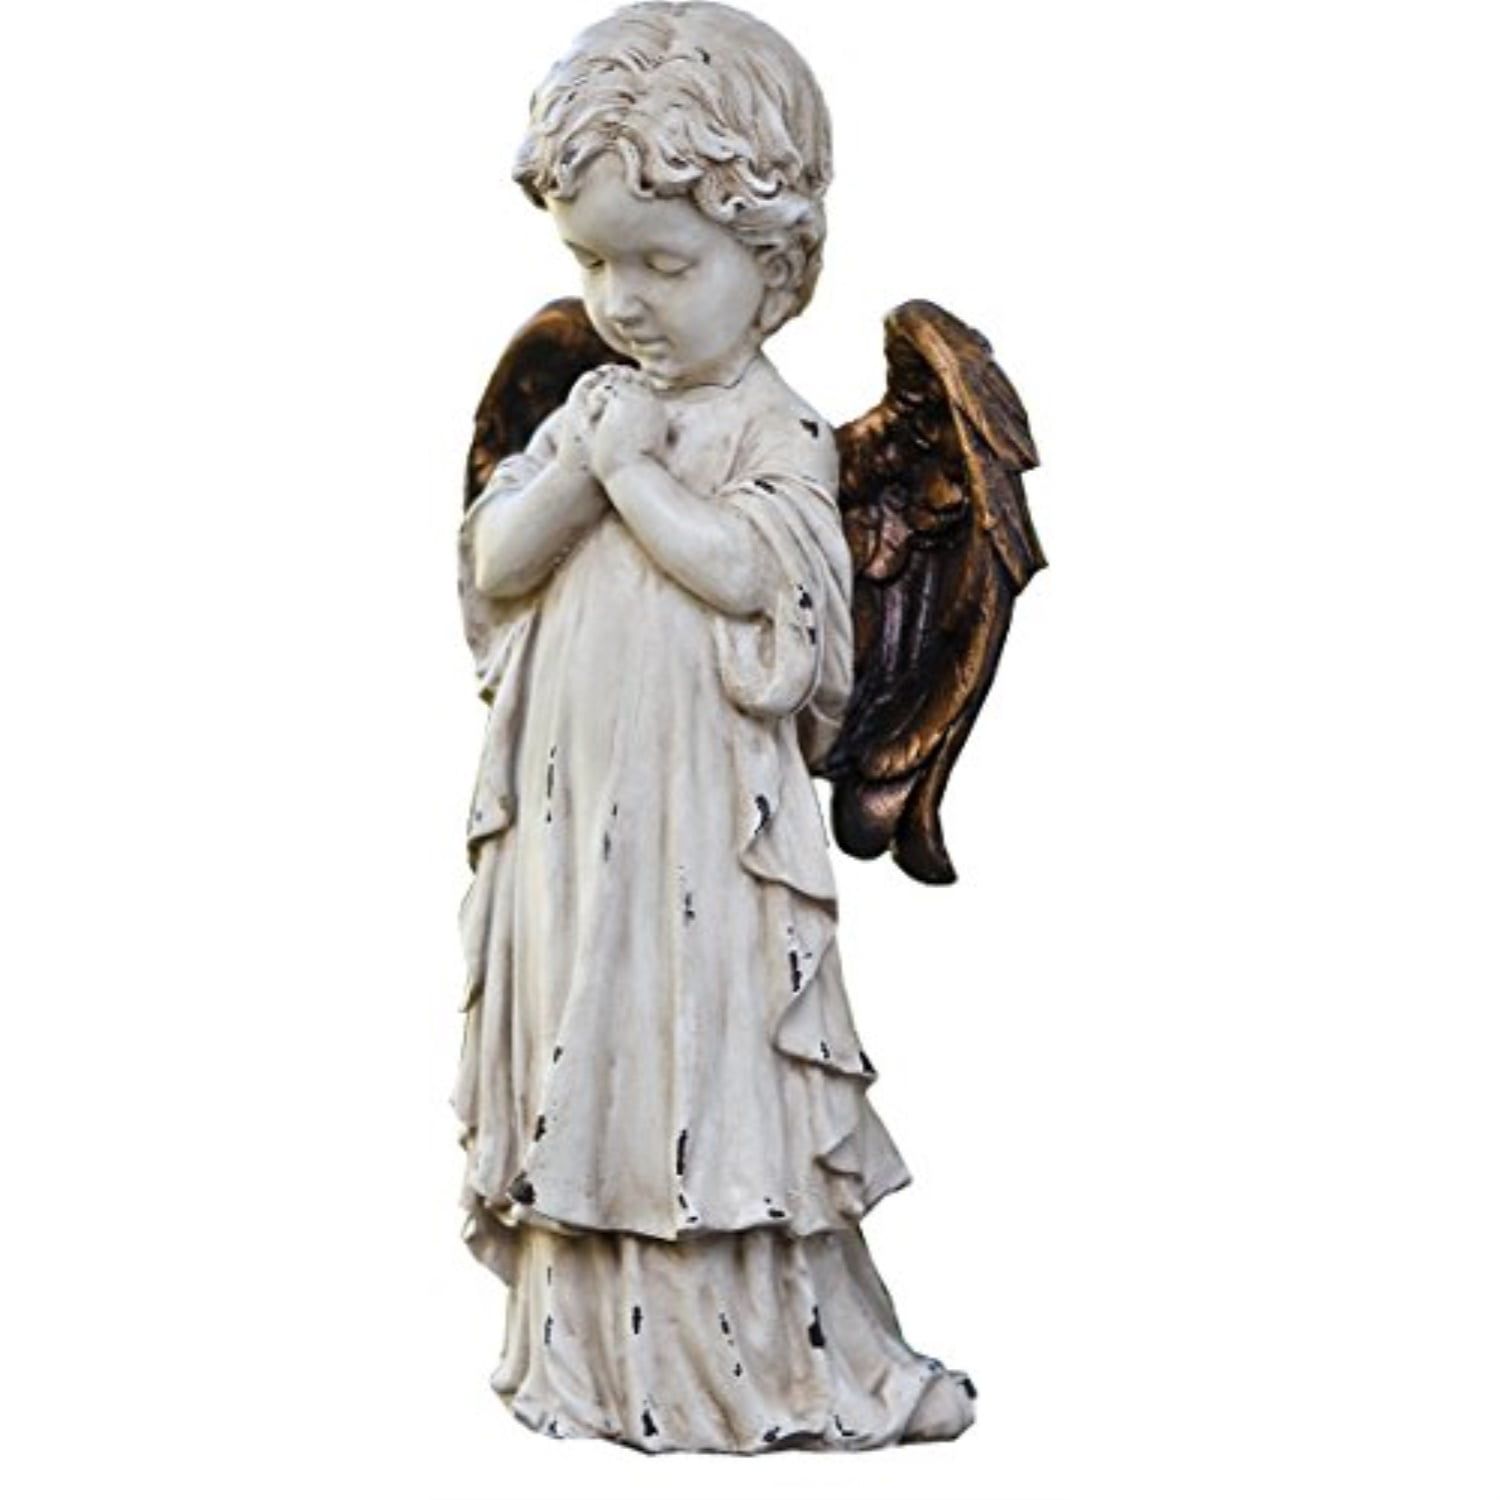 Mother's Day Gift Home Decor Standing Angel Figurine in White Dress